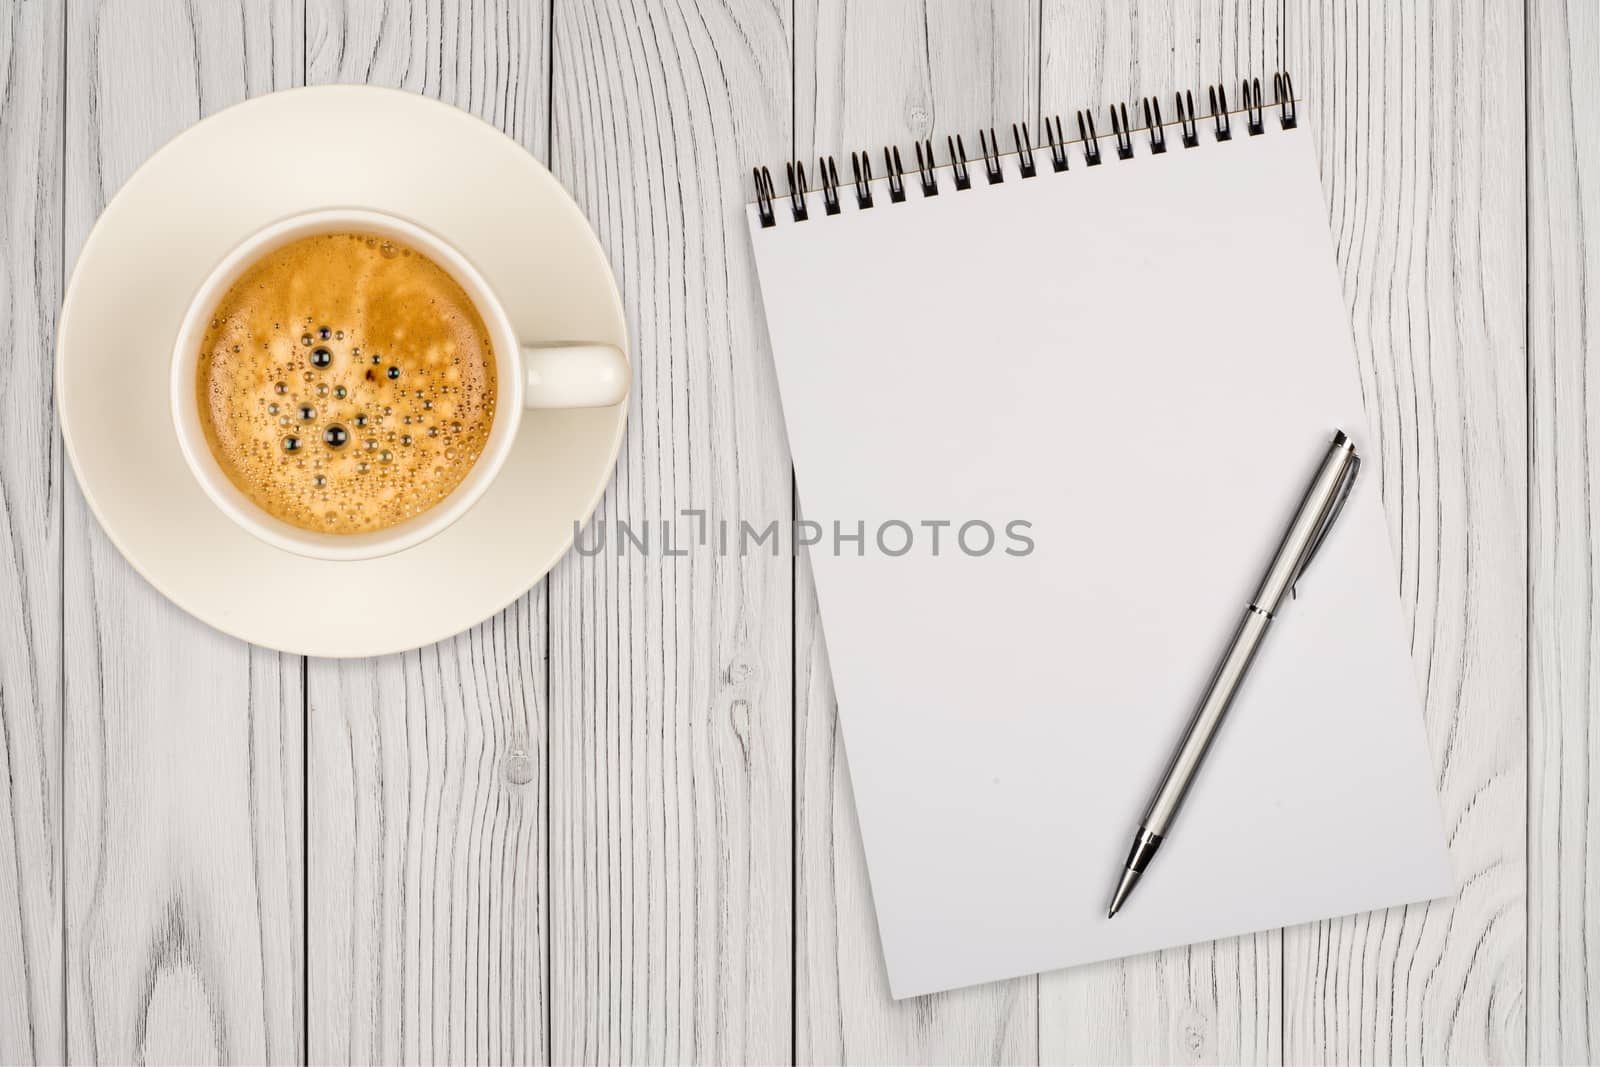 Coffee cup, spiral notebook and pen on the wooden table. Top view.